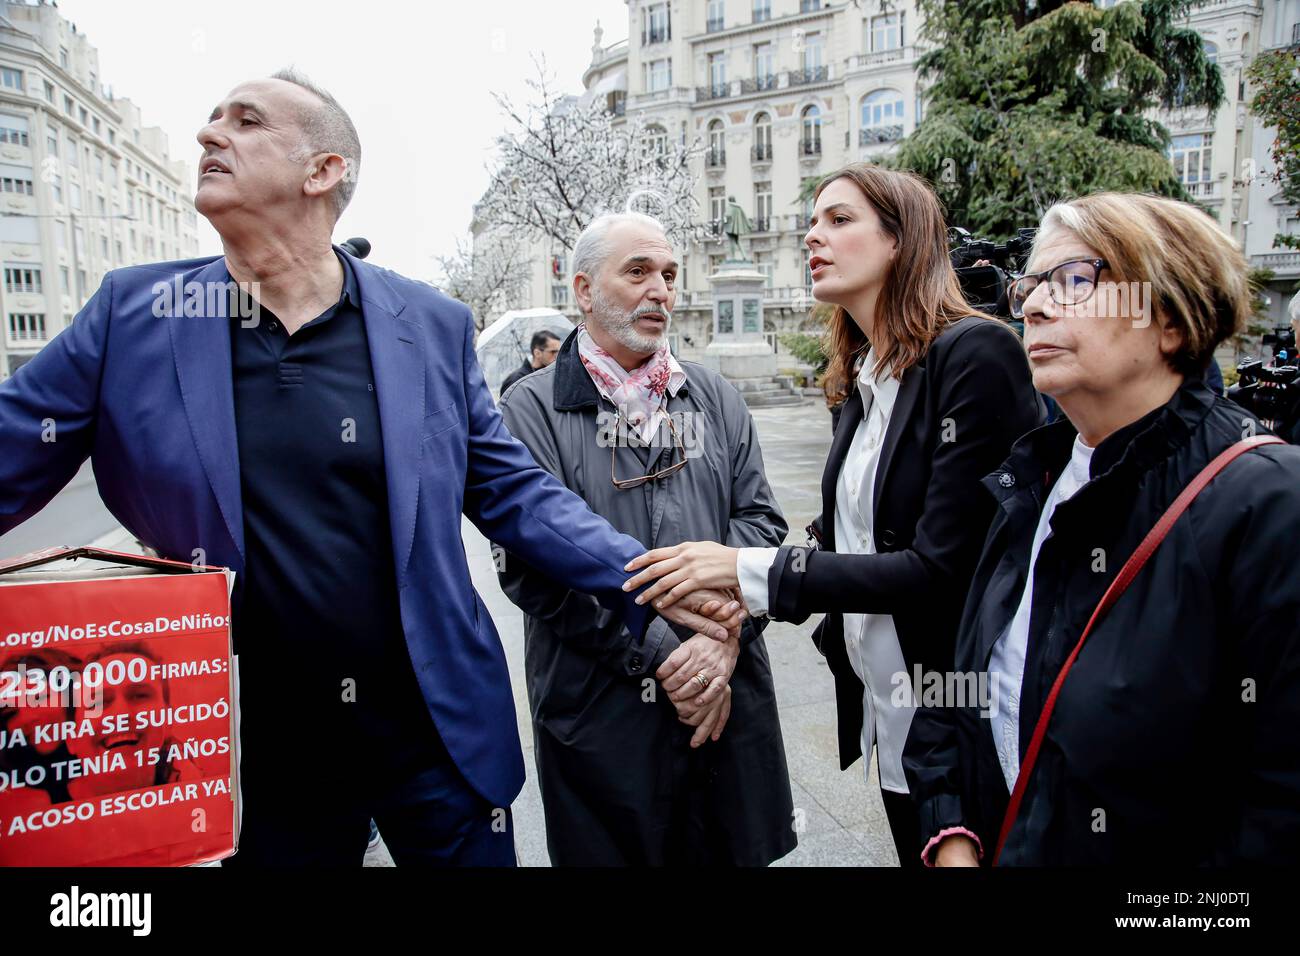 L-R) The father of Kira, the girl who committed suicide at the age of 15,  José Manuel López; the spokesperson of Más Madrid in the City Council, Rita  Maestre and the deputy